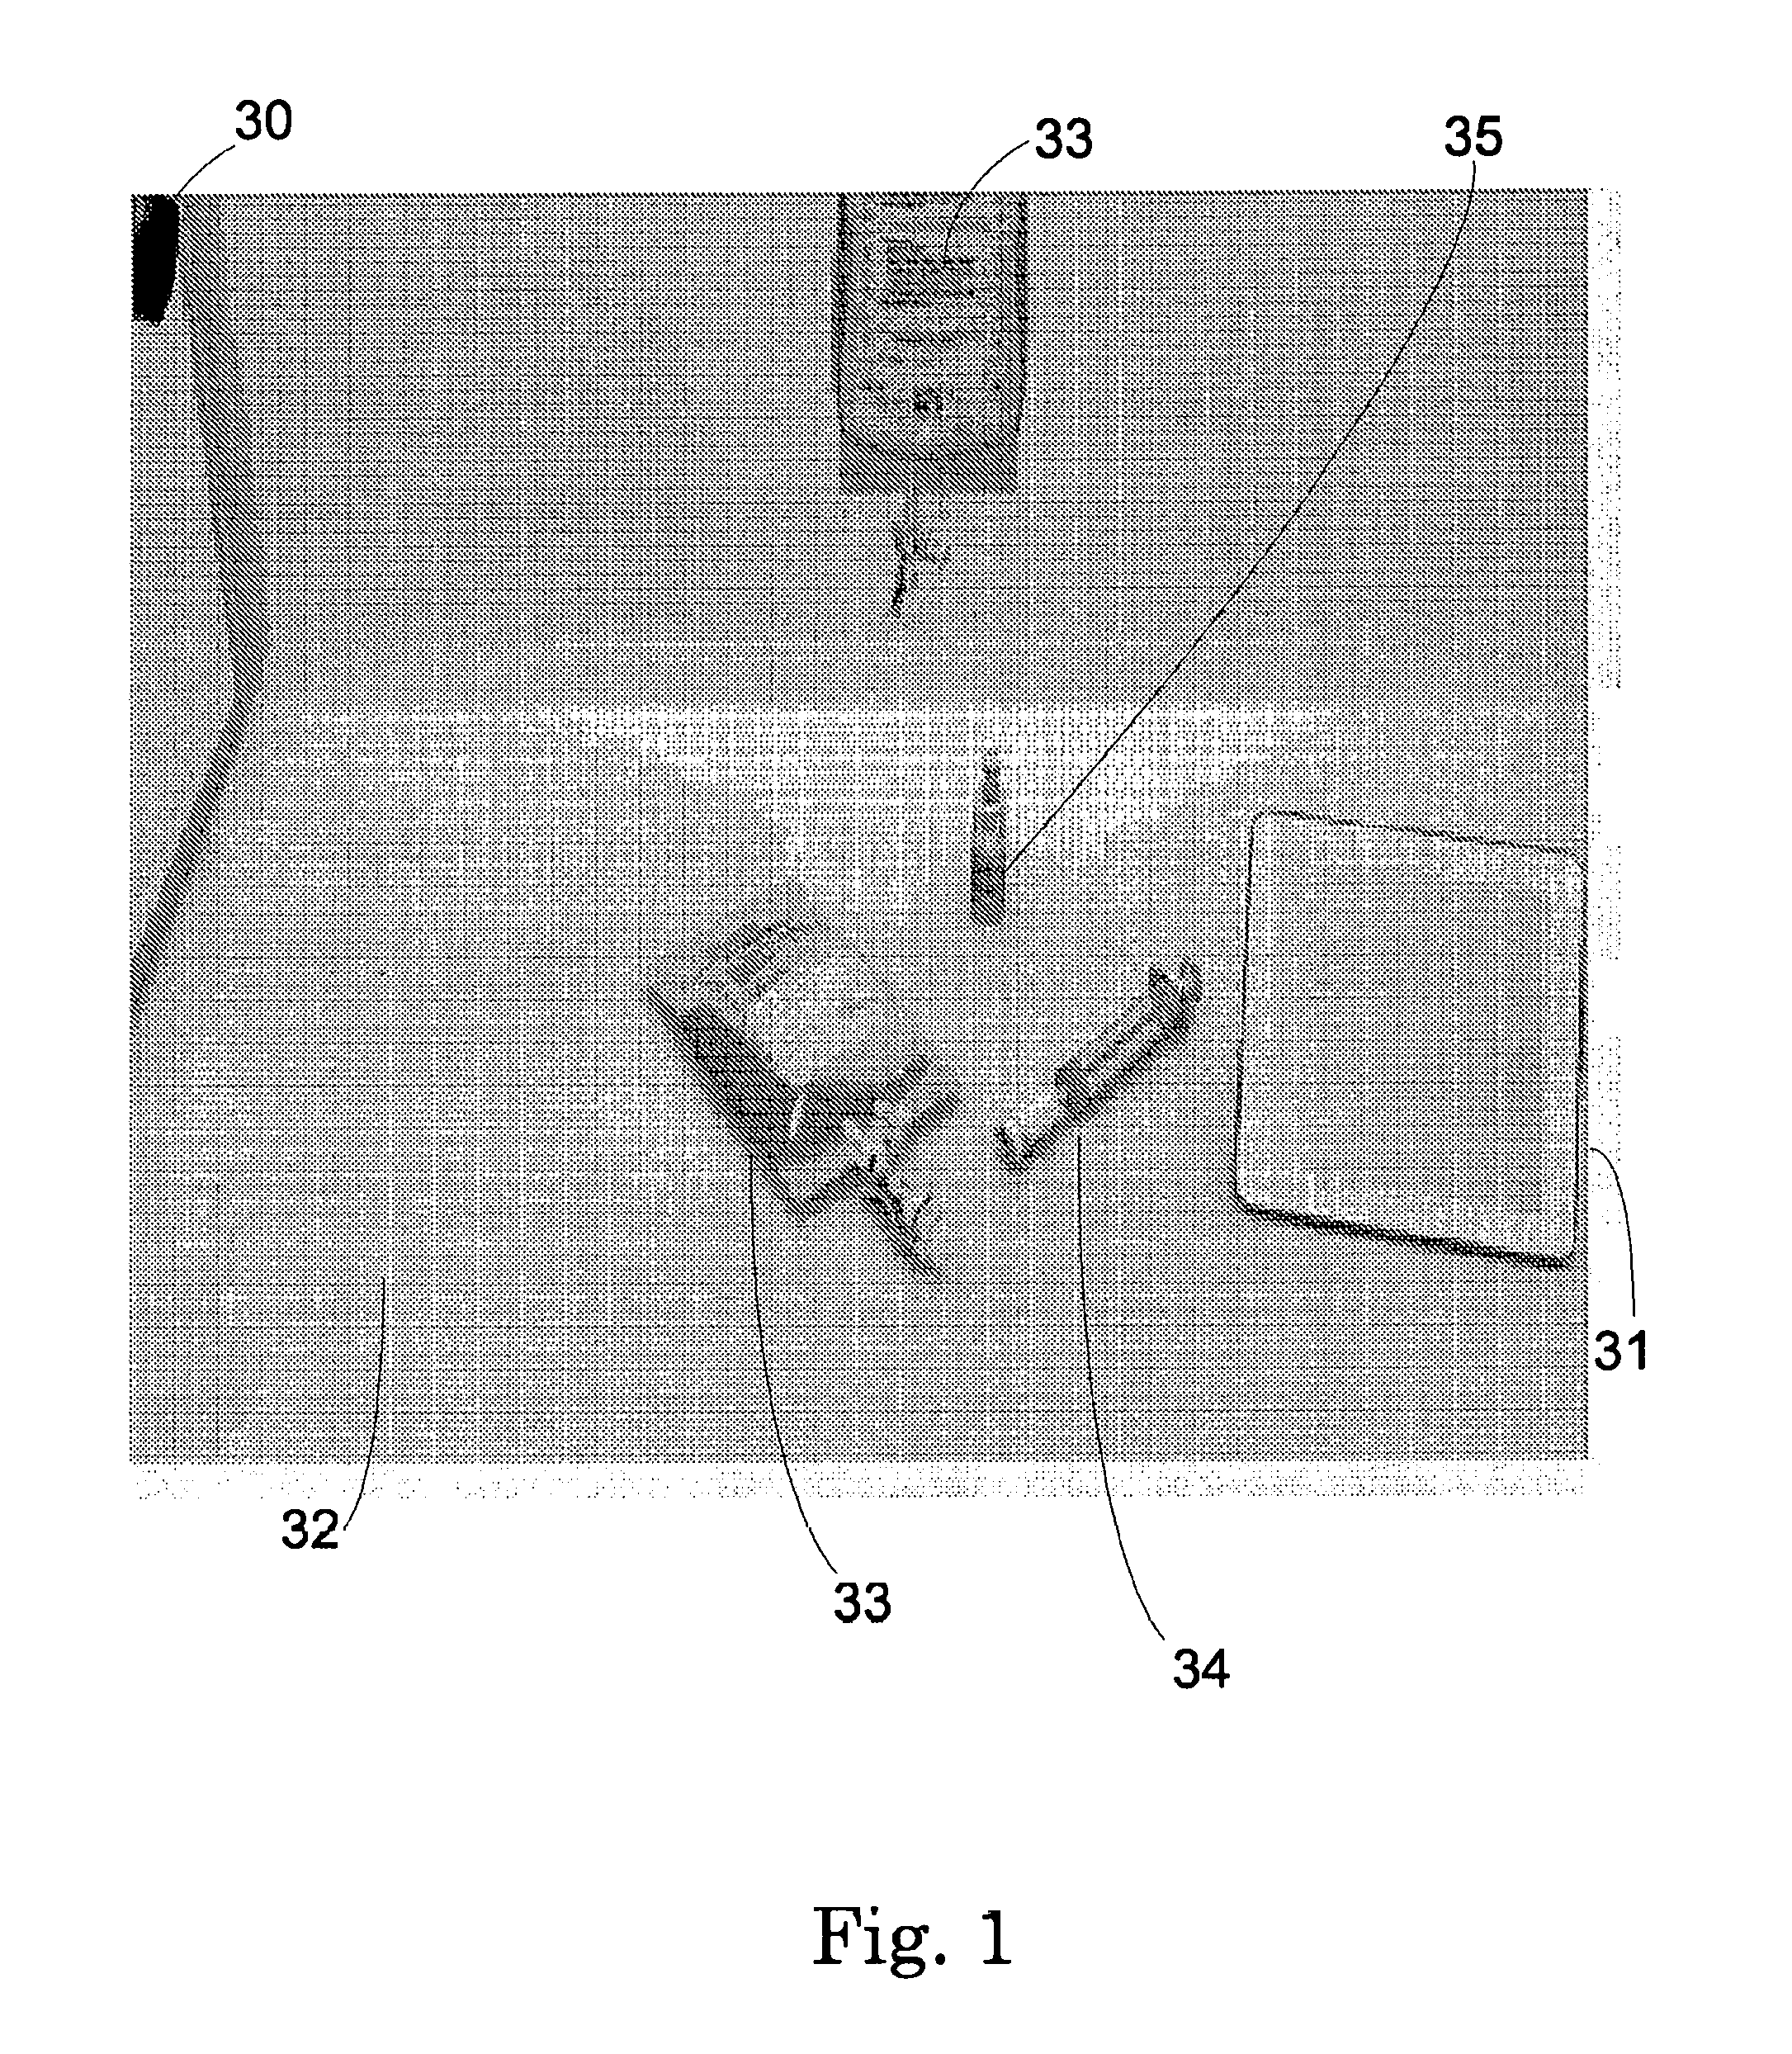 Method and apparatus for monitoring, documenting and assisting with the manual compounding of medications